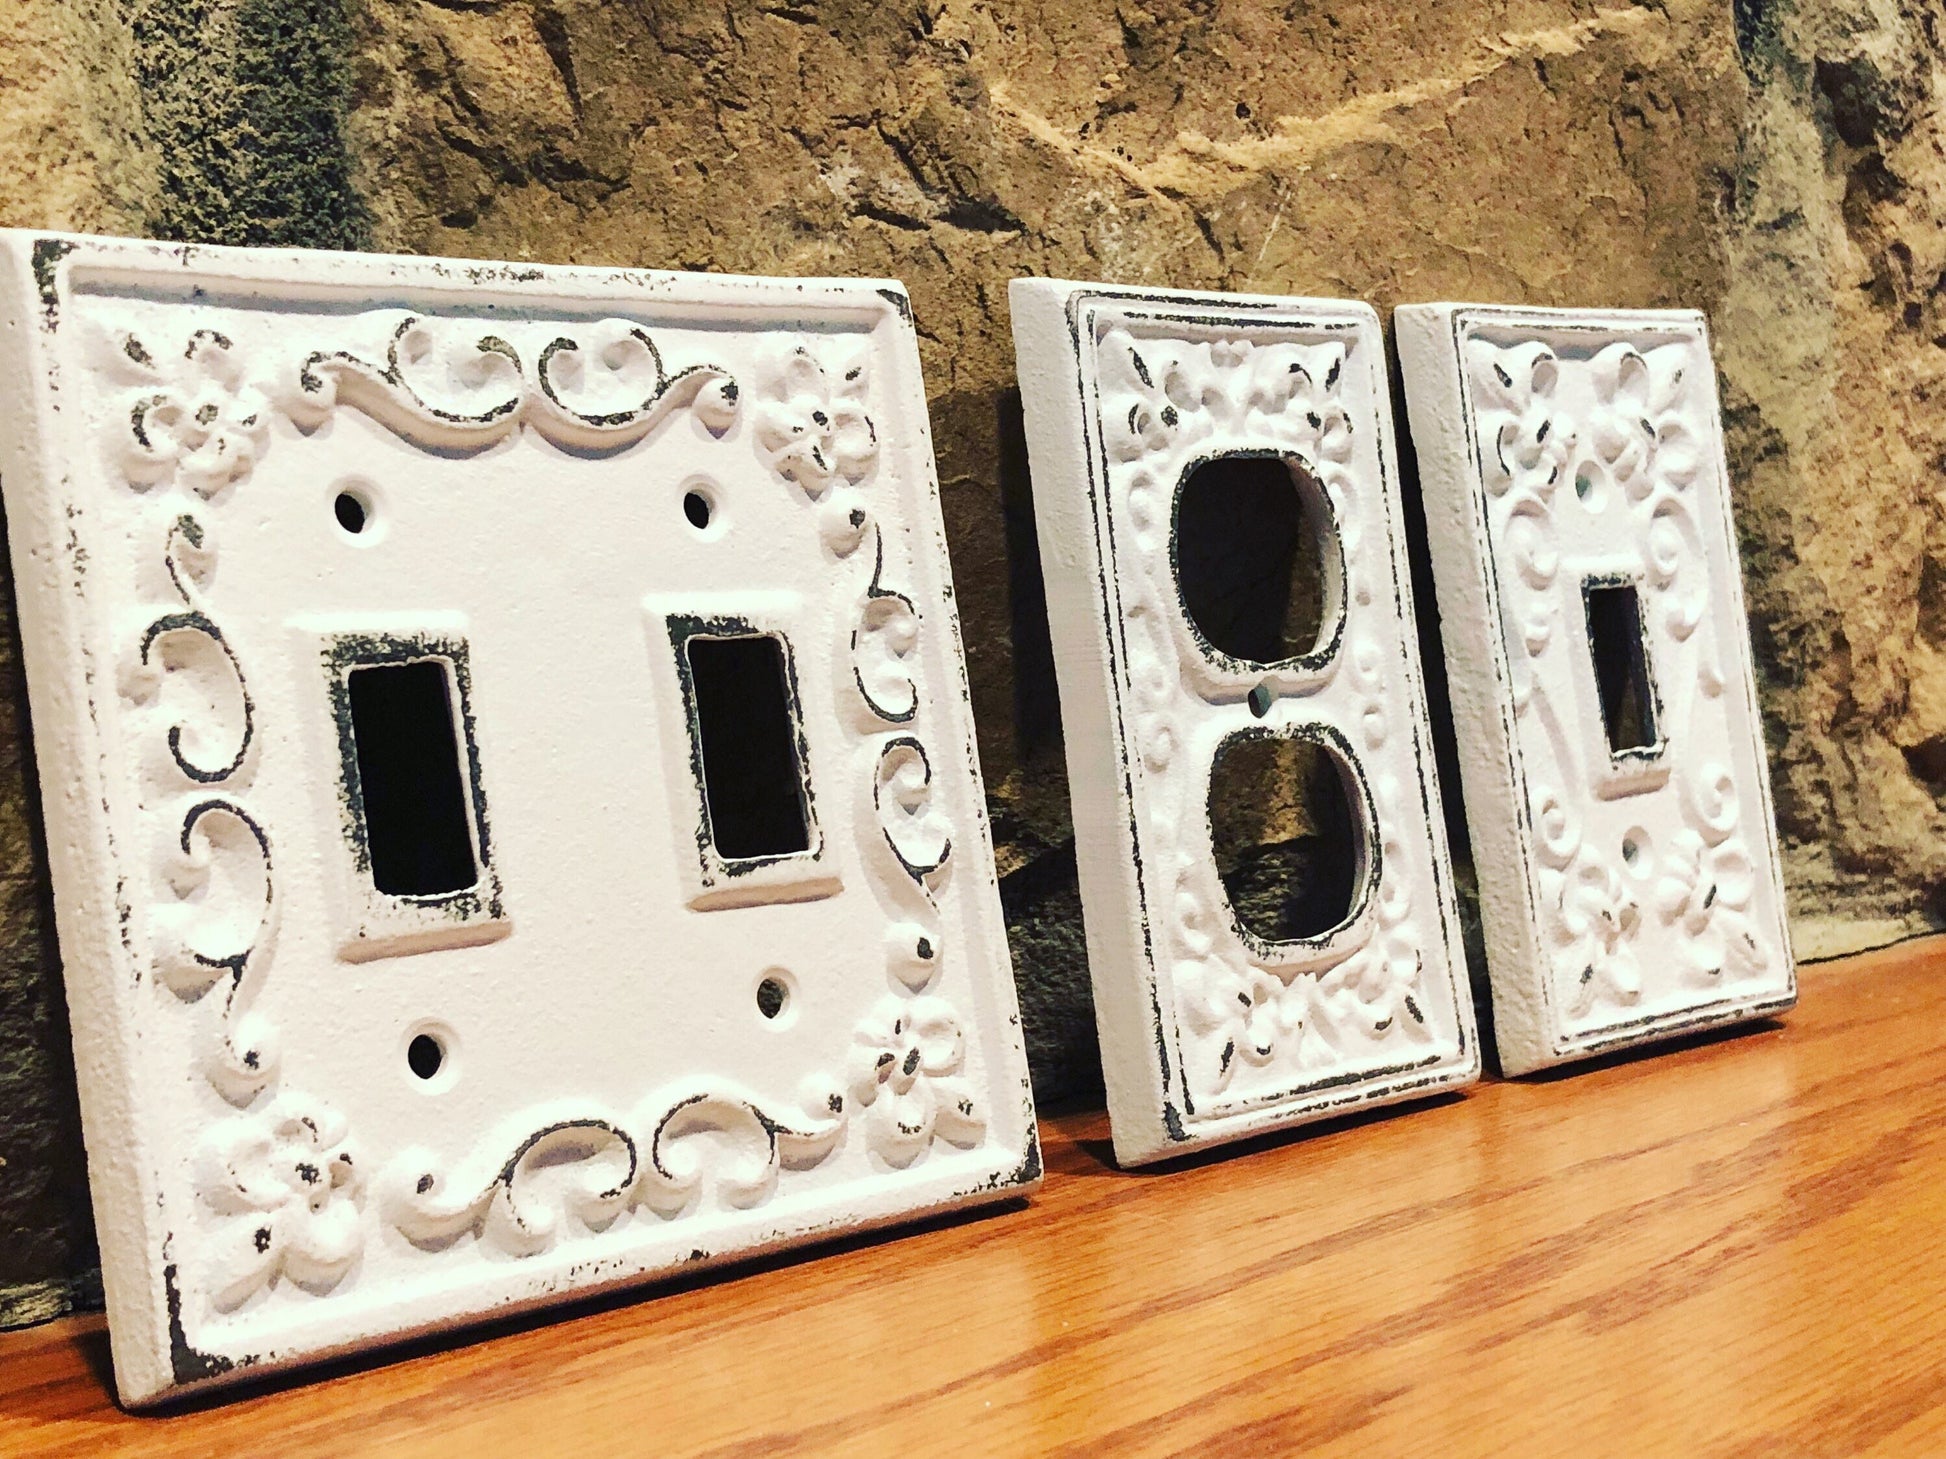 SALE/Cast Iron Double Light Switch Cover/single light switch cover/Nursery/Bedroom/Light Switch Plate/Pick color/Outlet Cover/